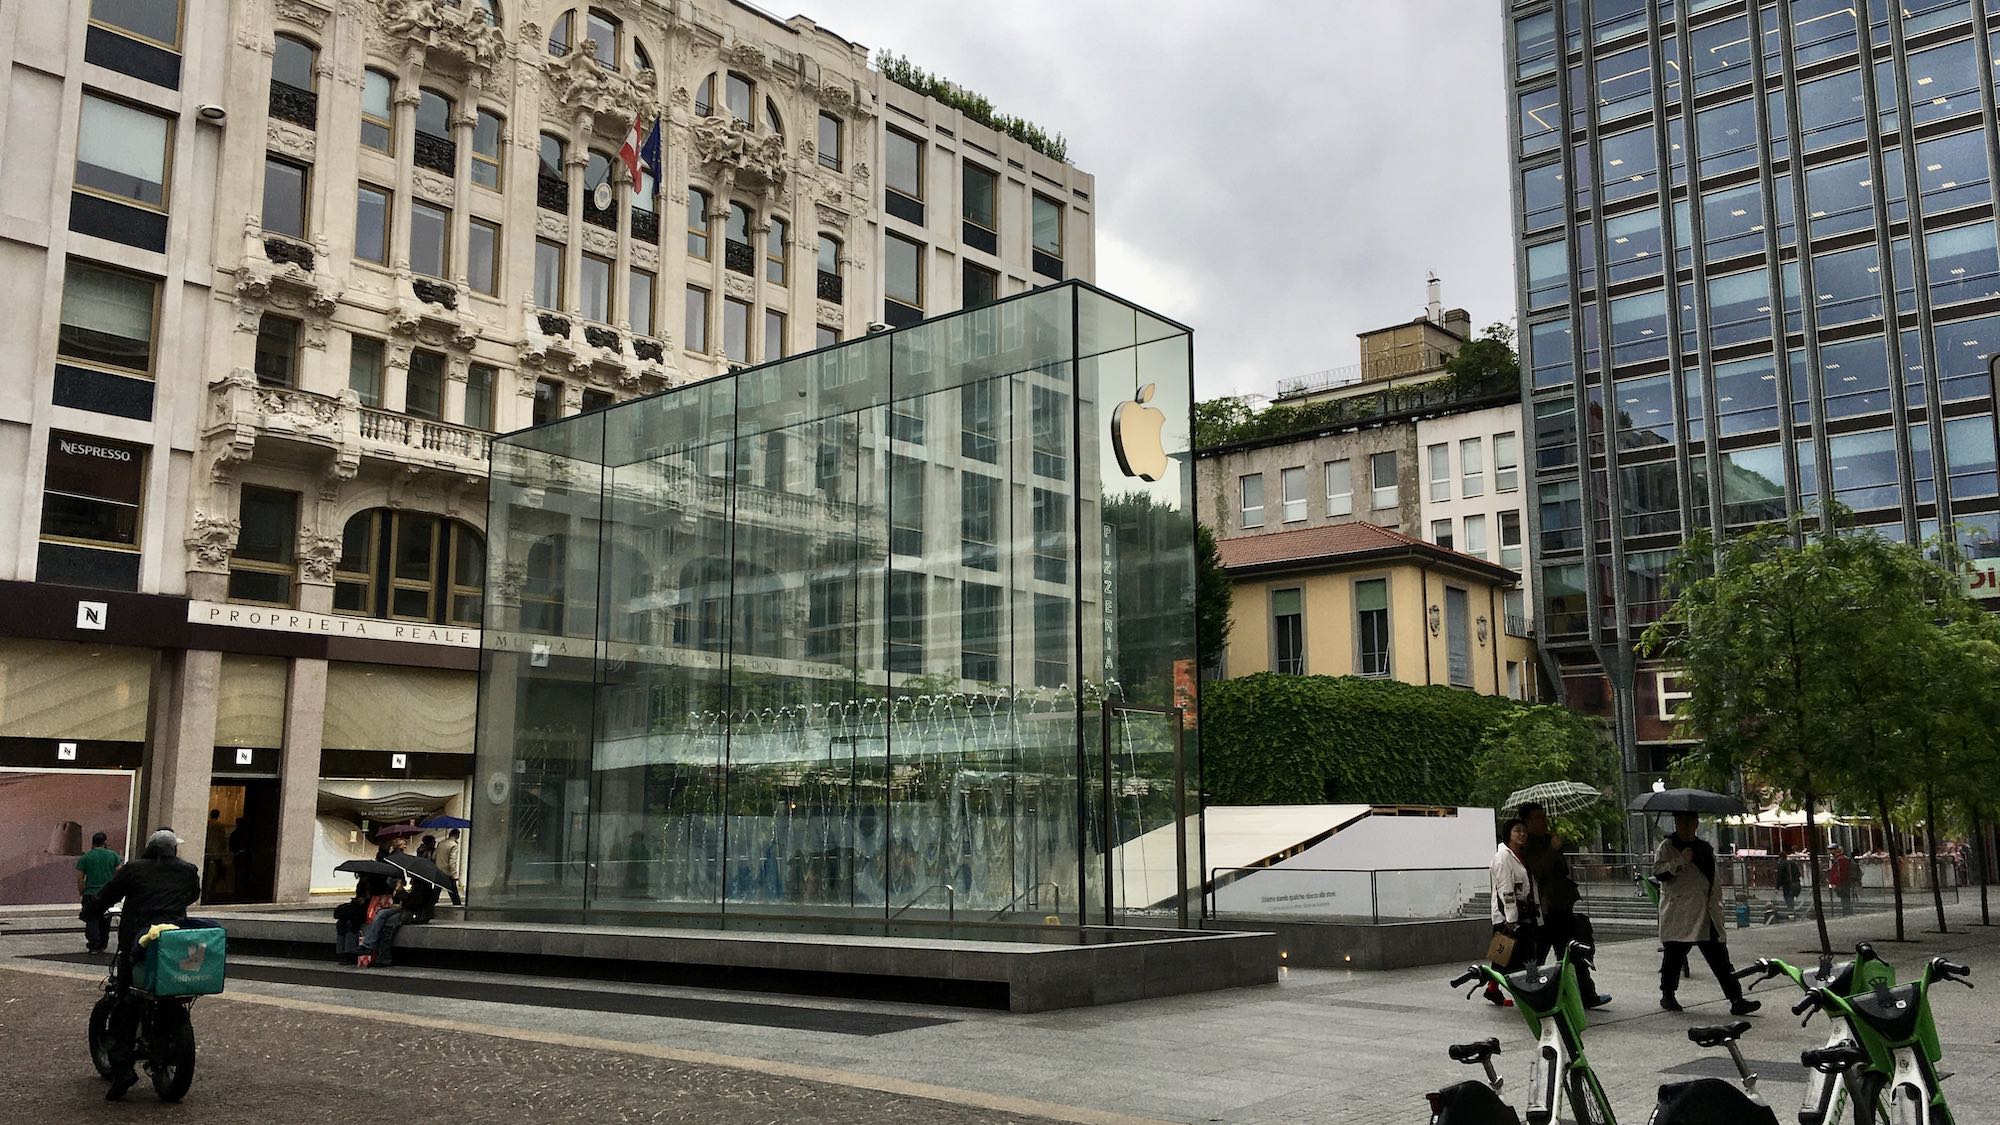 Photo of glass box above Apple store with fountain behind the box